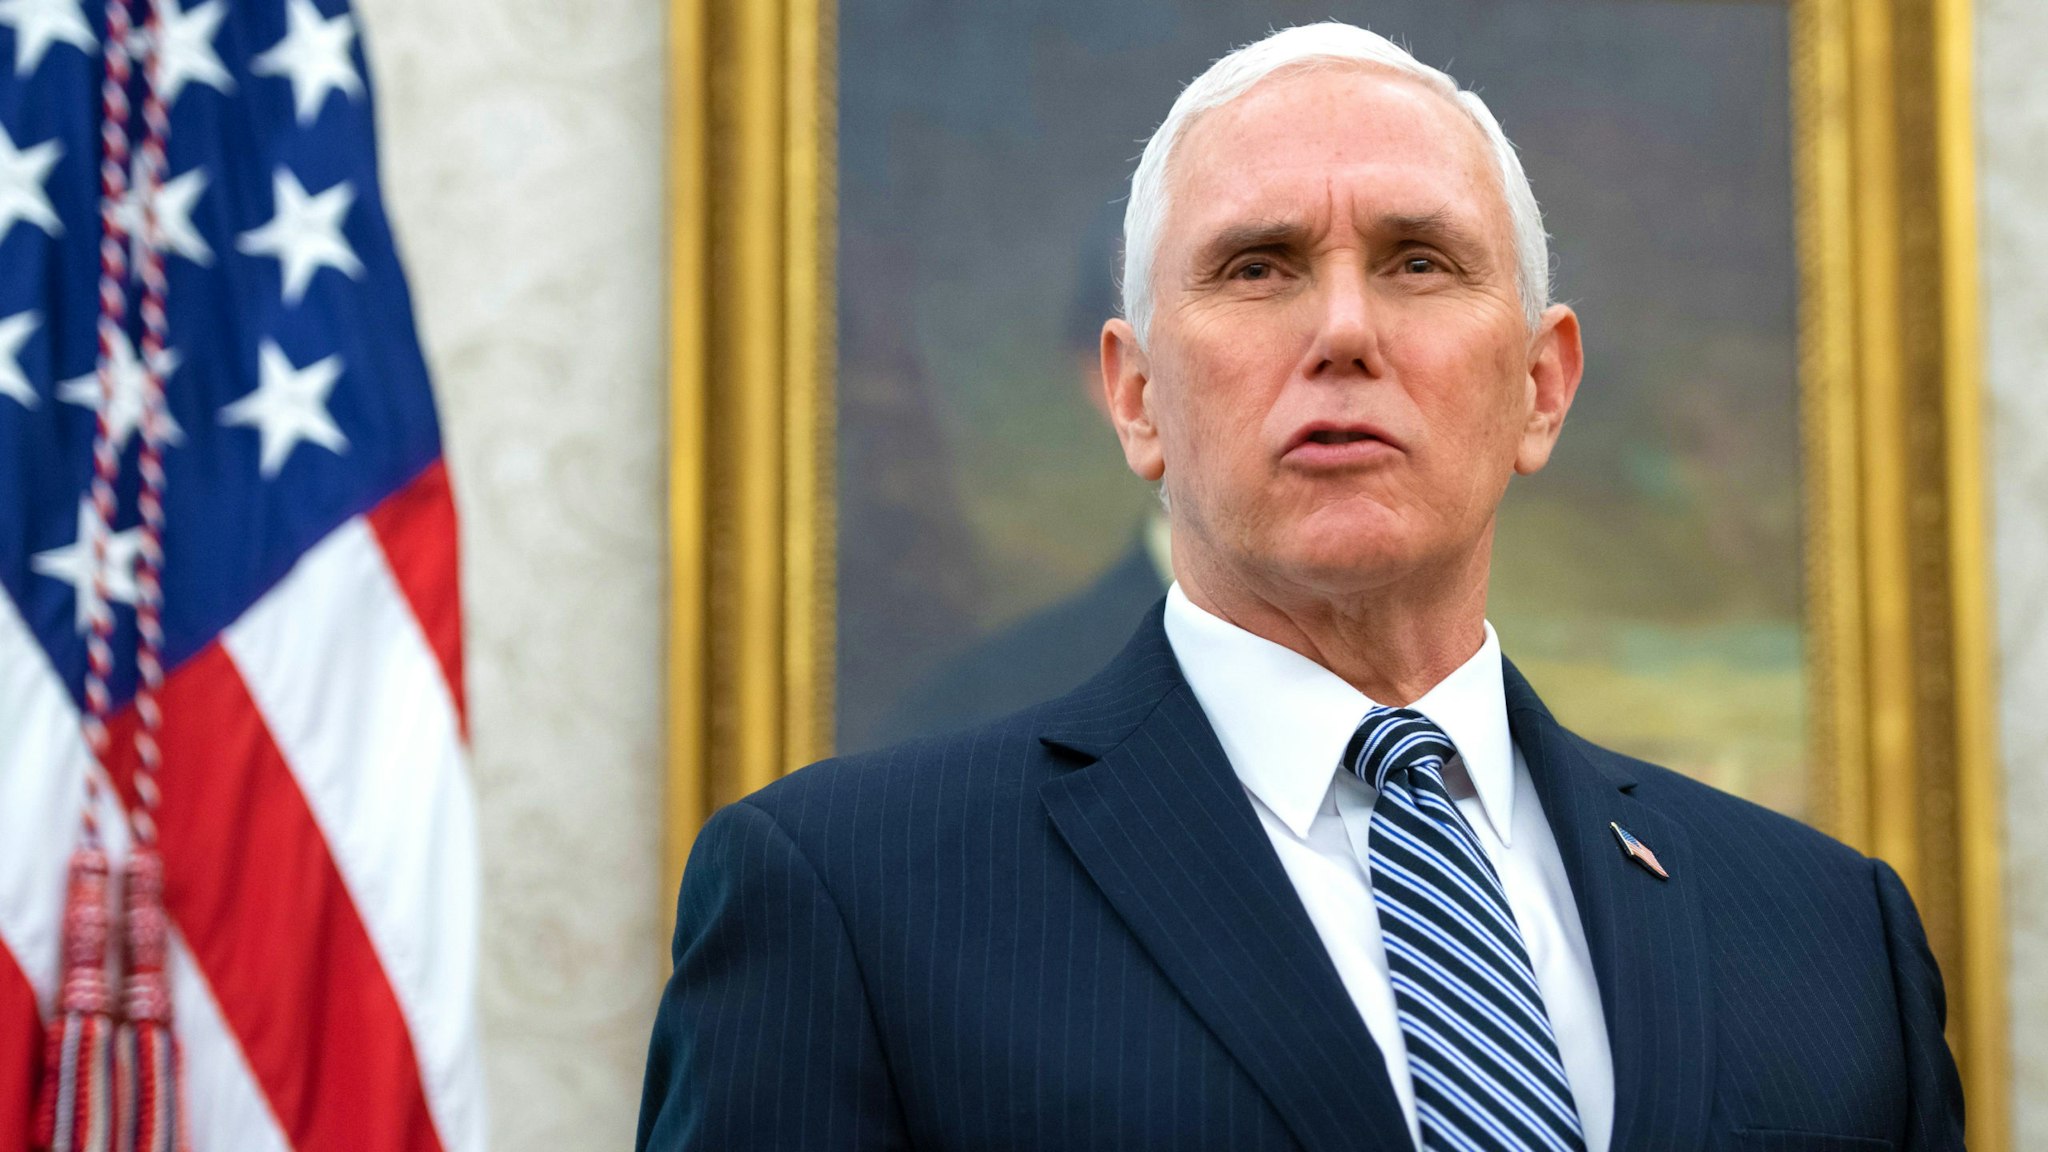 US Vice President Mike Pence speaks during an event with President Donald Trump to sign a Proclamation in honor of National Nurses Day in the Oval Office of the White House in Washington, DC, May 6, 2020.